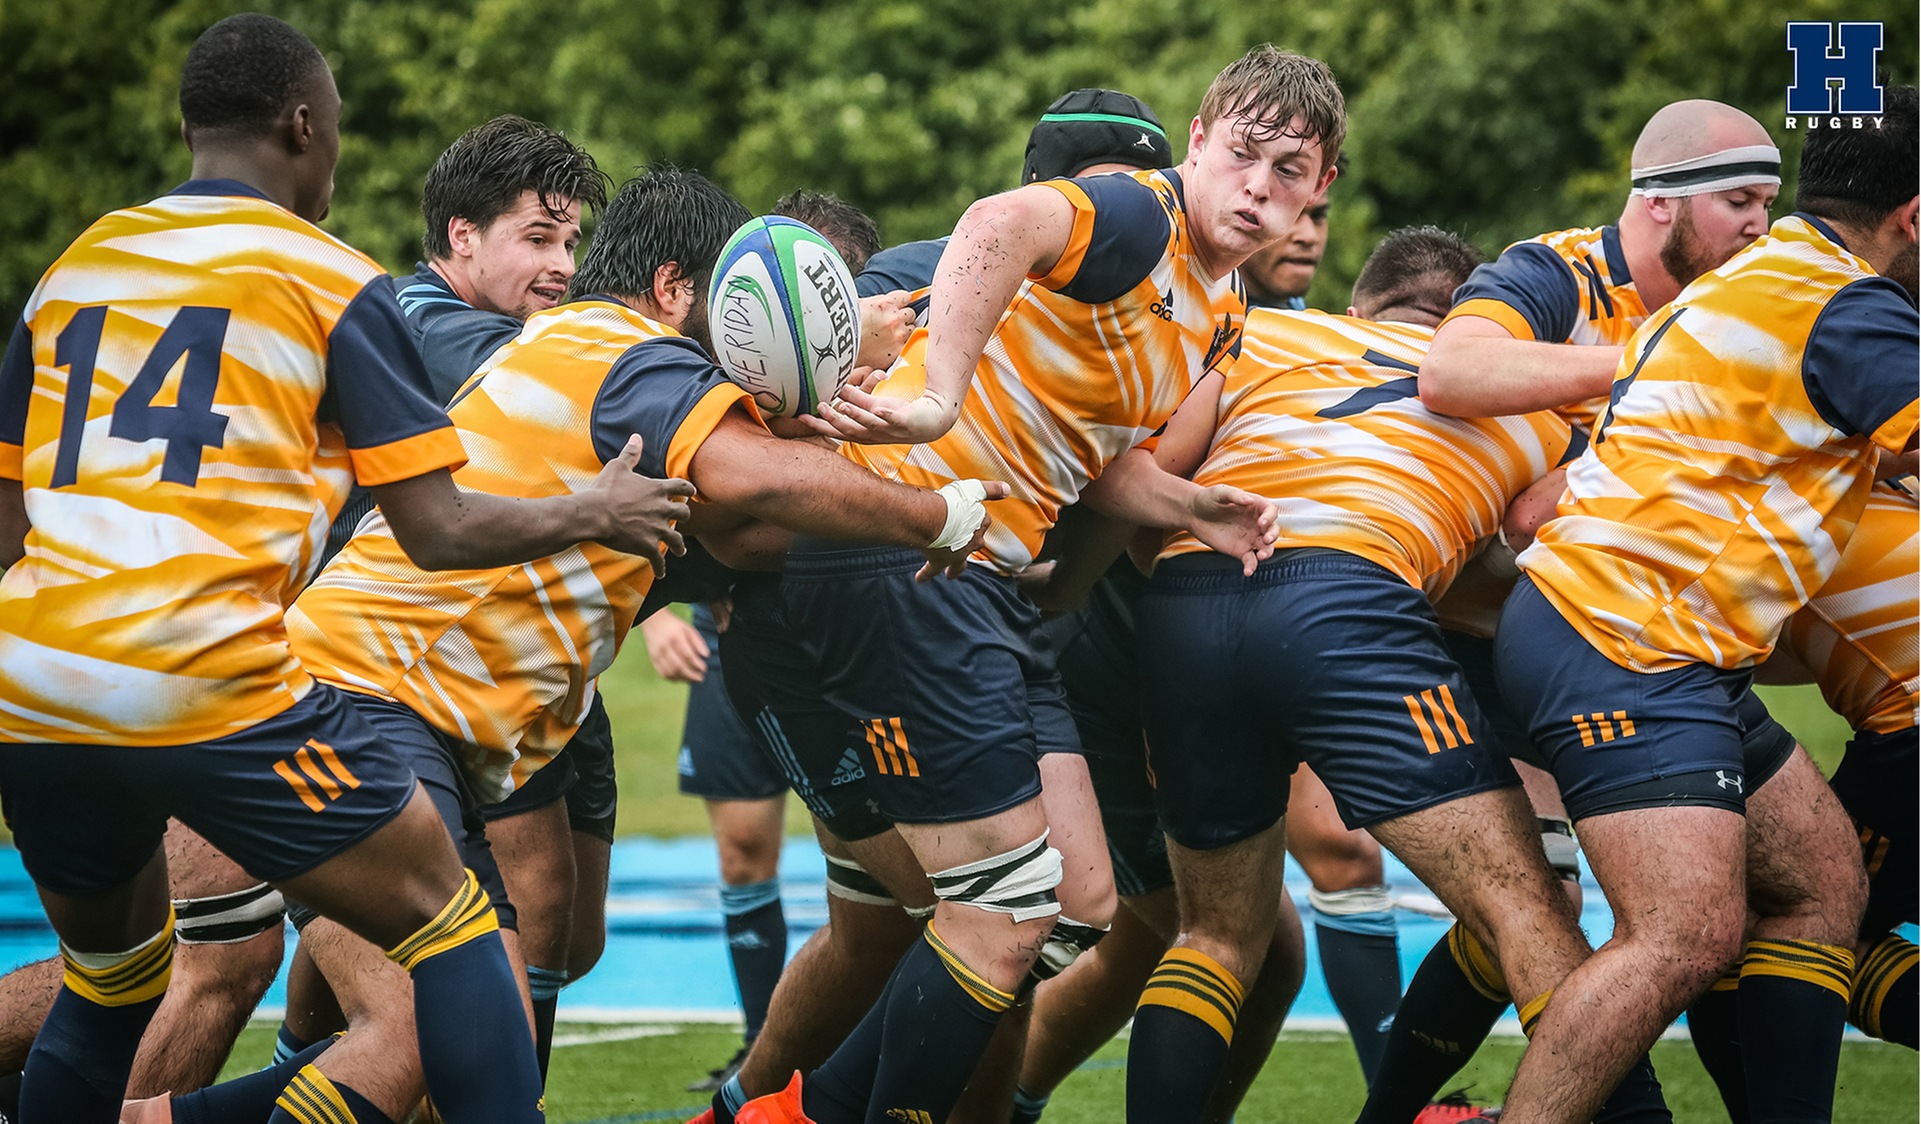 Men’s Rugby Face Tough Test in OCAA Semifinal Match